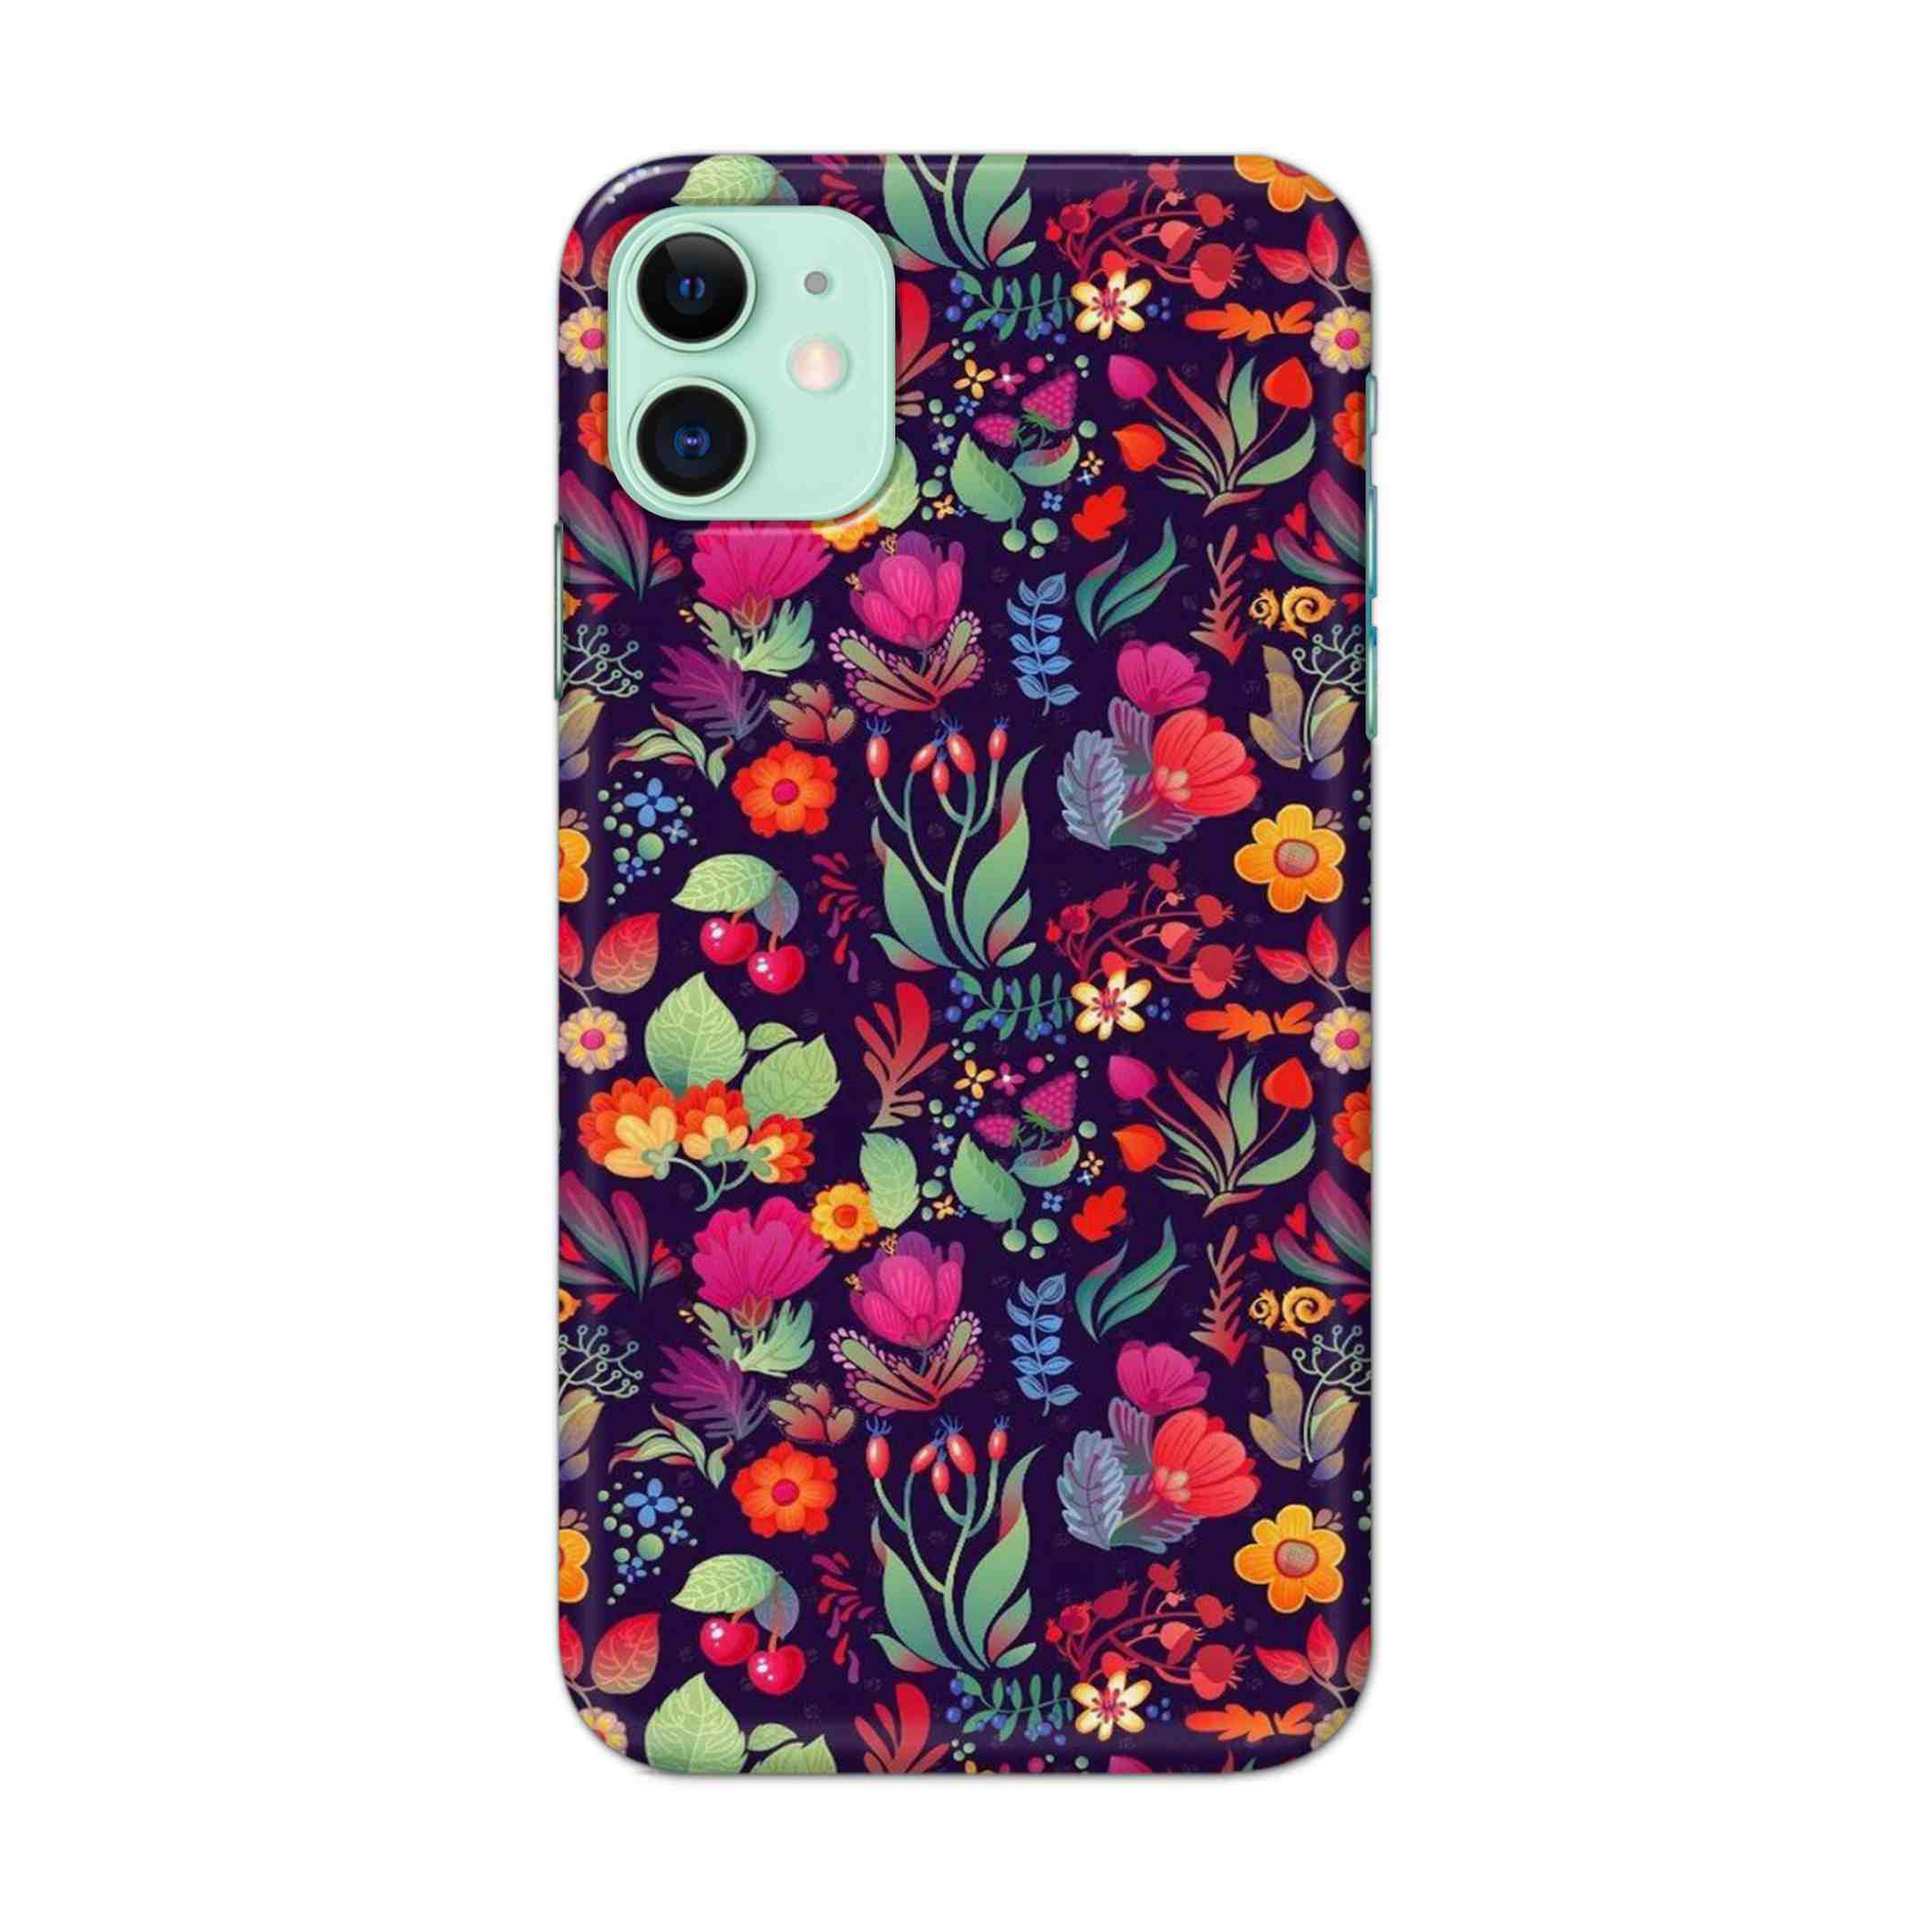 Buy Fruits Flower Hard Back Mobile Phone Case/Cover For iPhone 11 Online